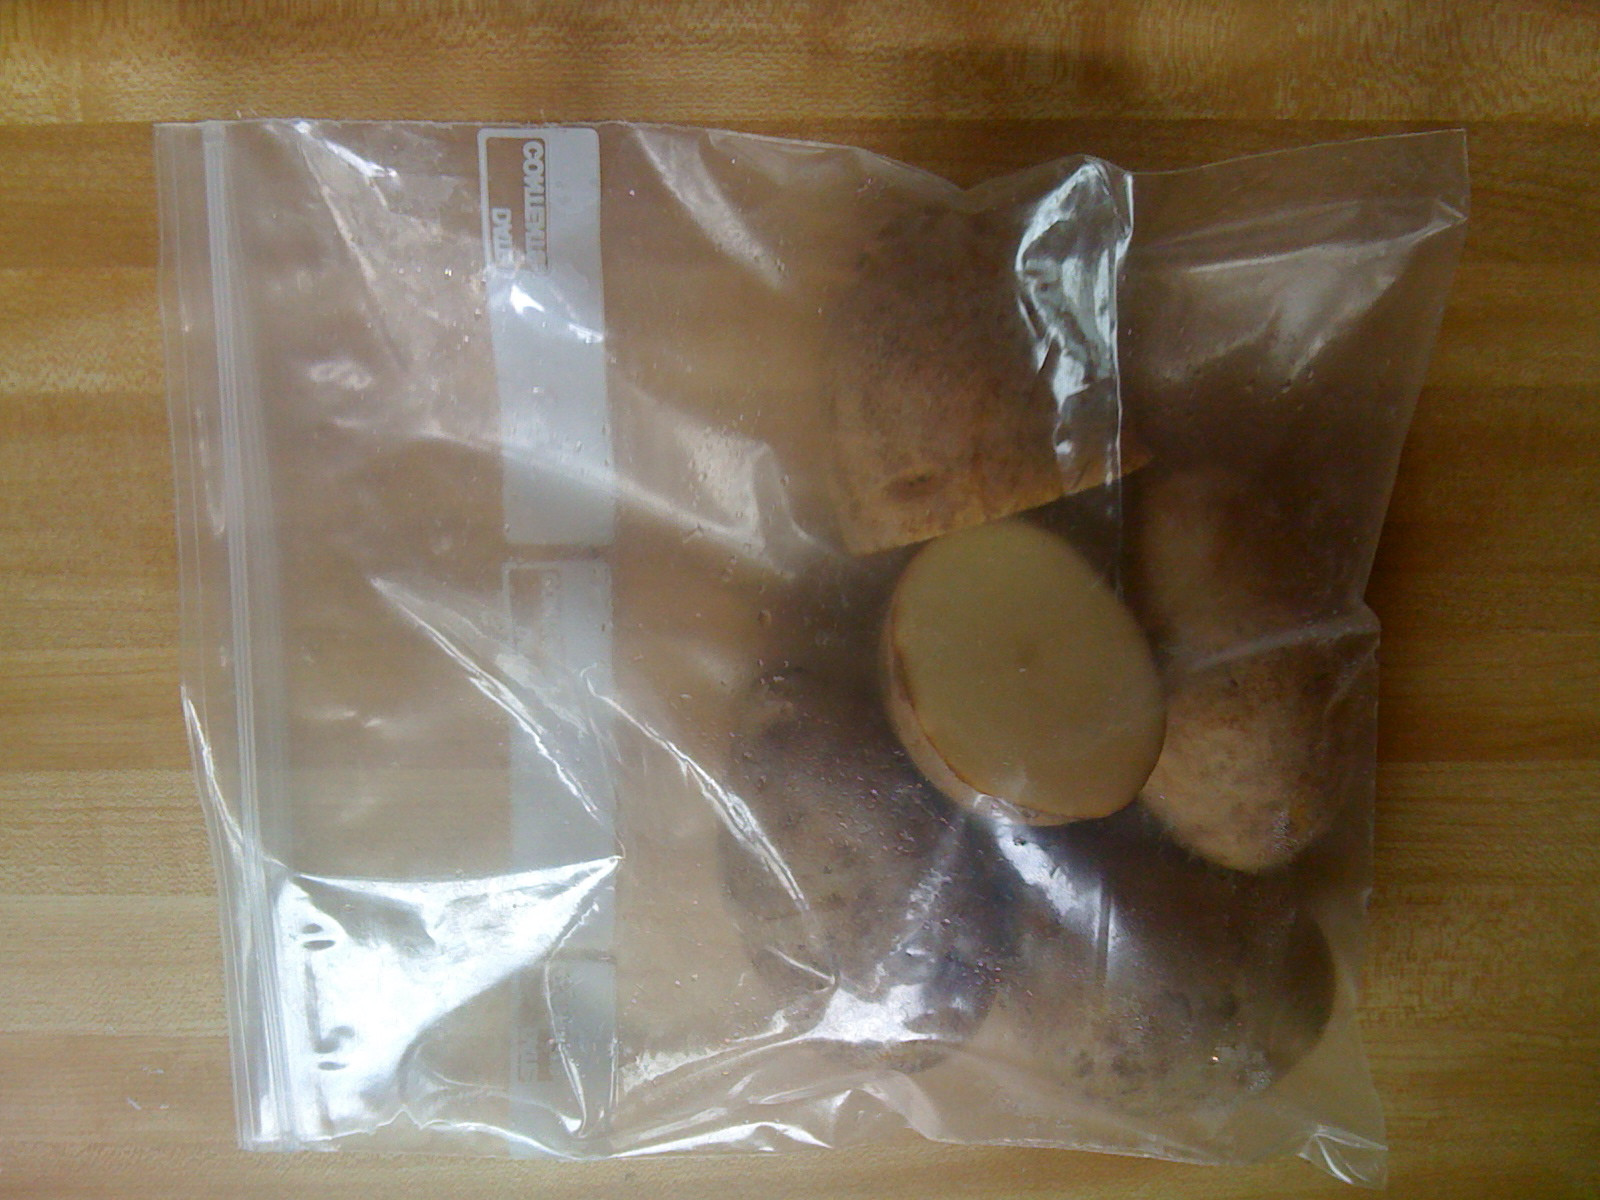 Baked Potato In Microwave Ziplock Bag
 How to Bake Potatoes in a Microwave So they Turn out